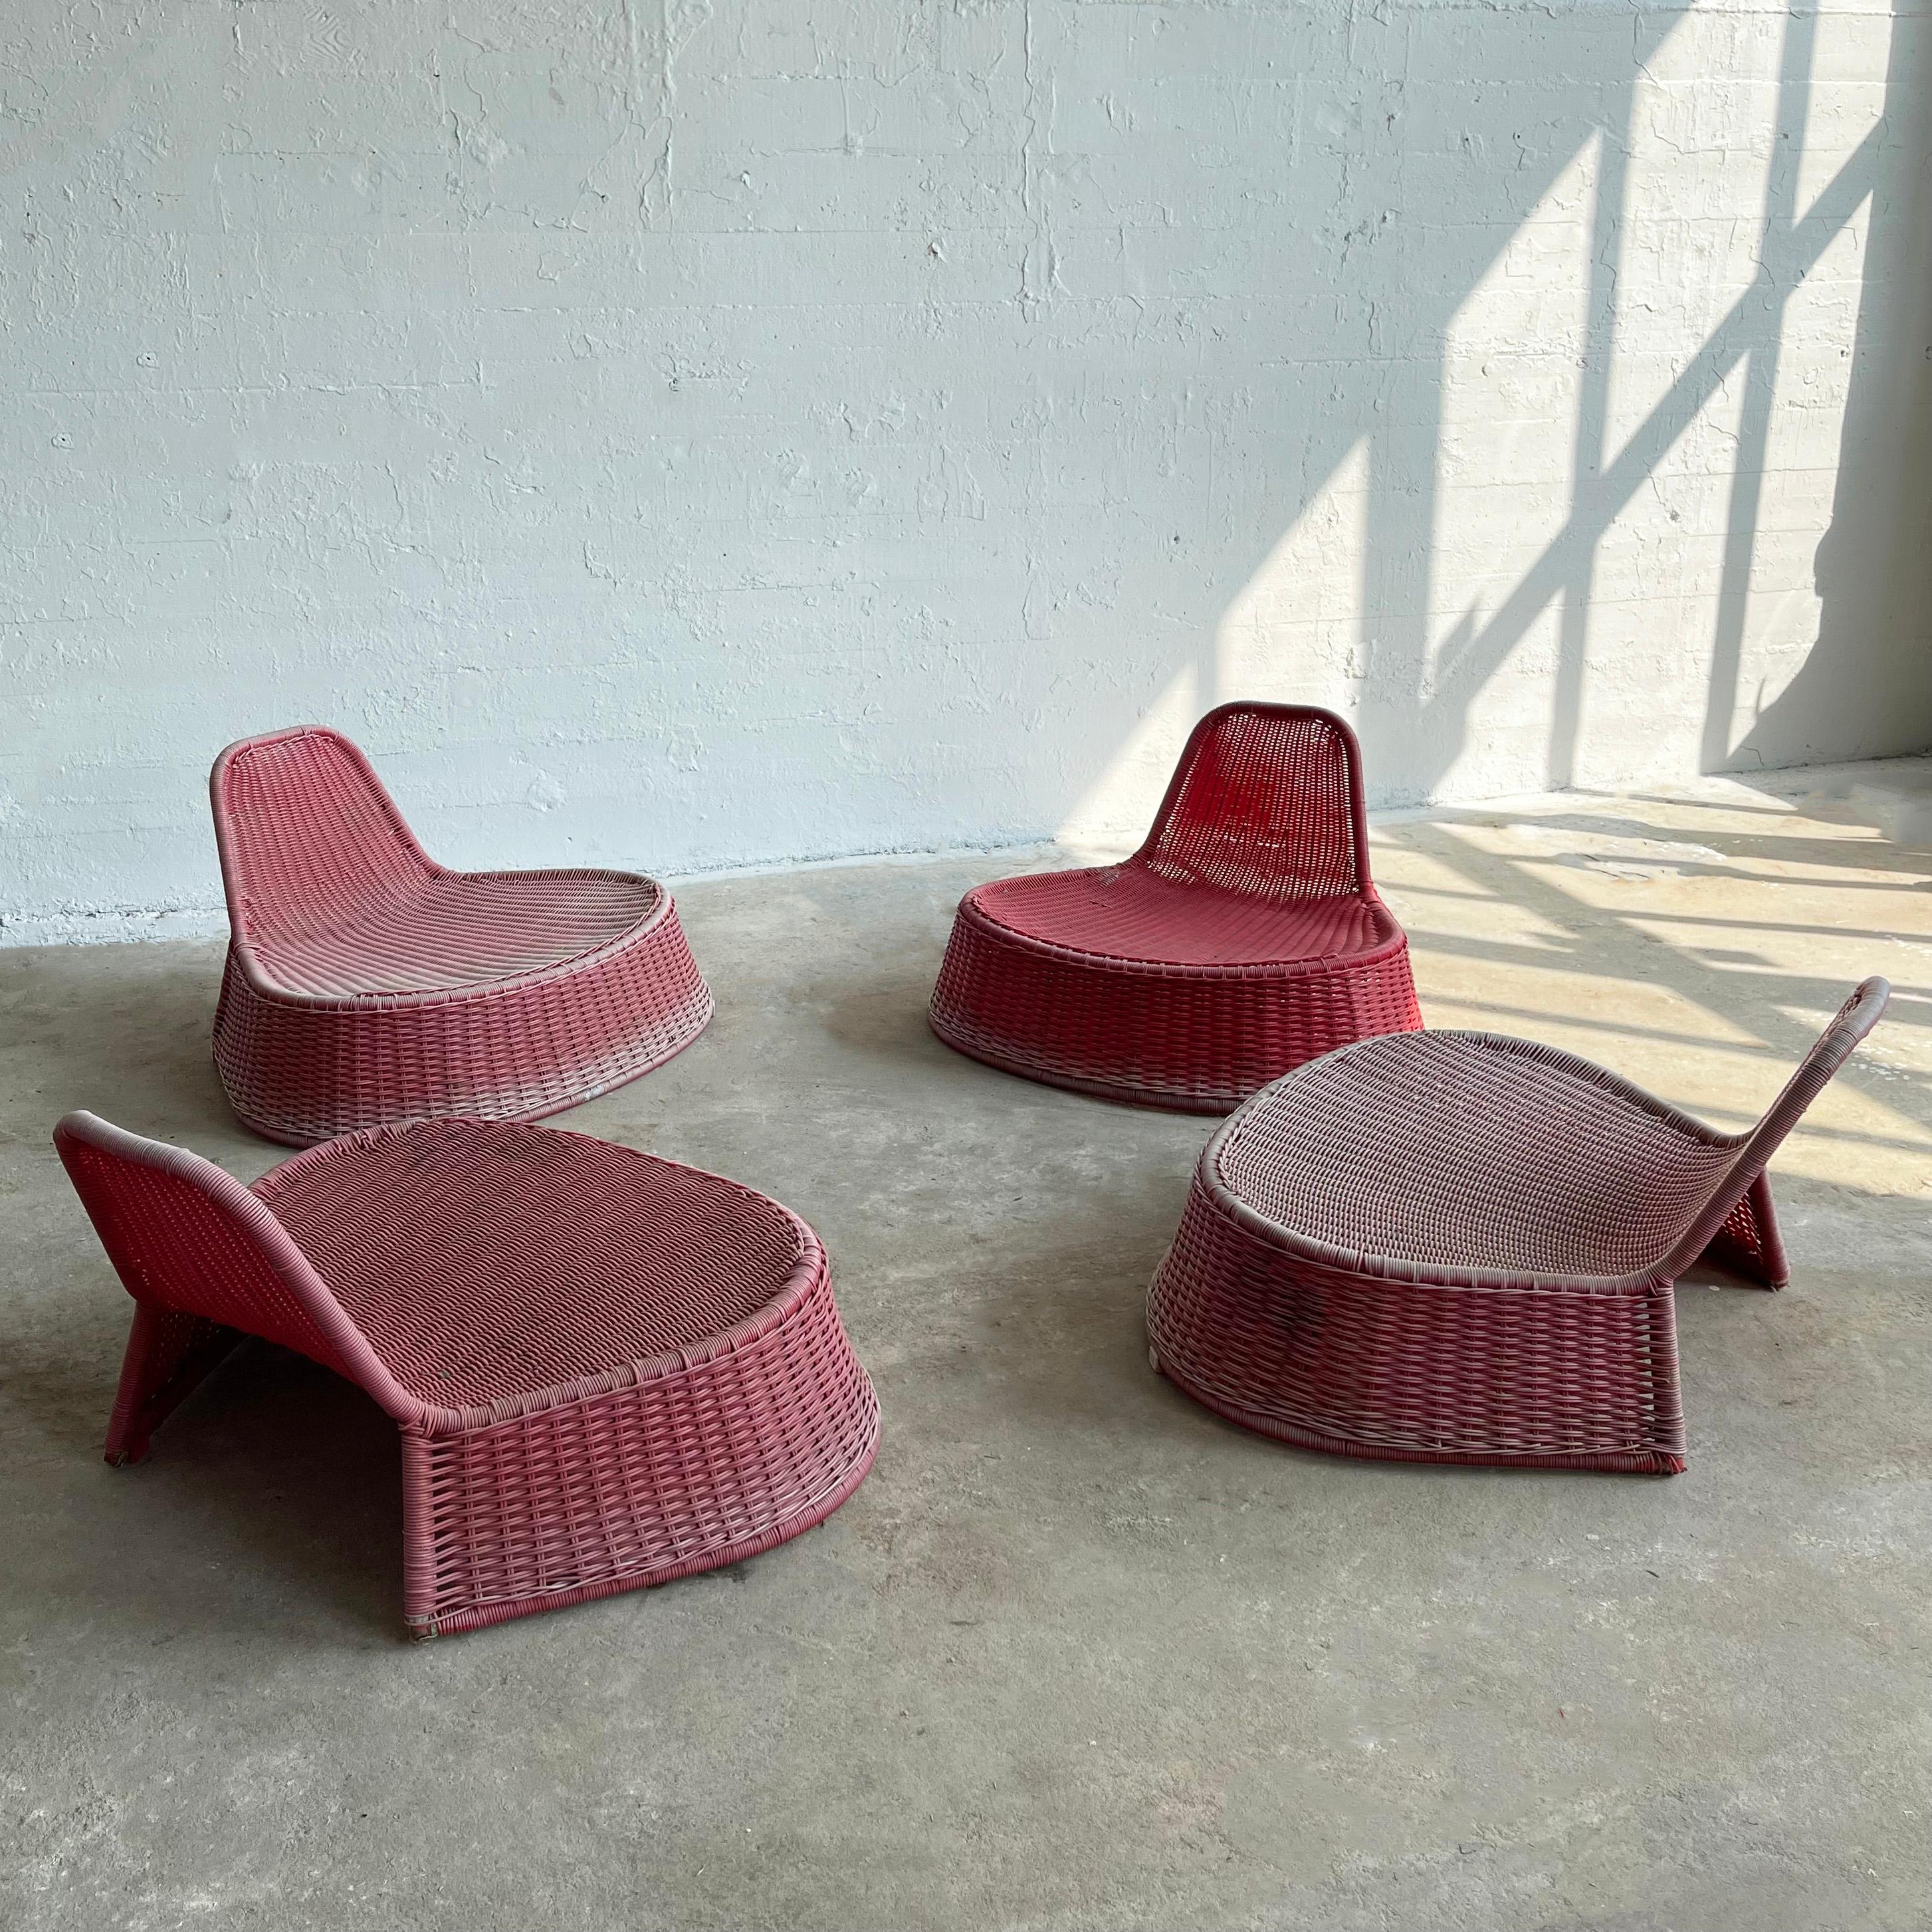 Plastic Pink Woven Outdoor Lounge Chairs By Monika Mulder For Ikea For Sale